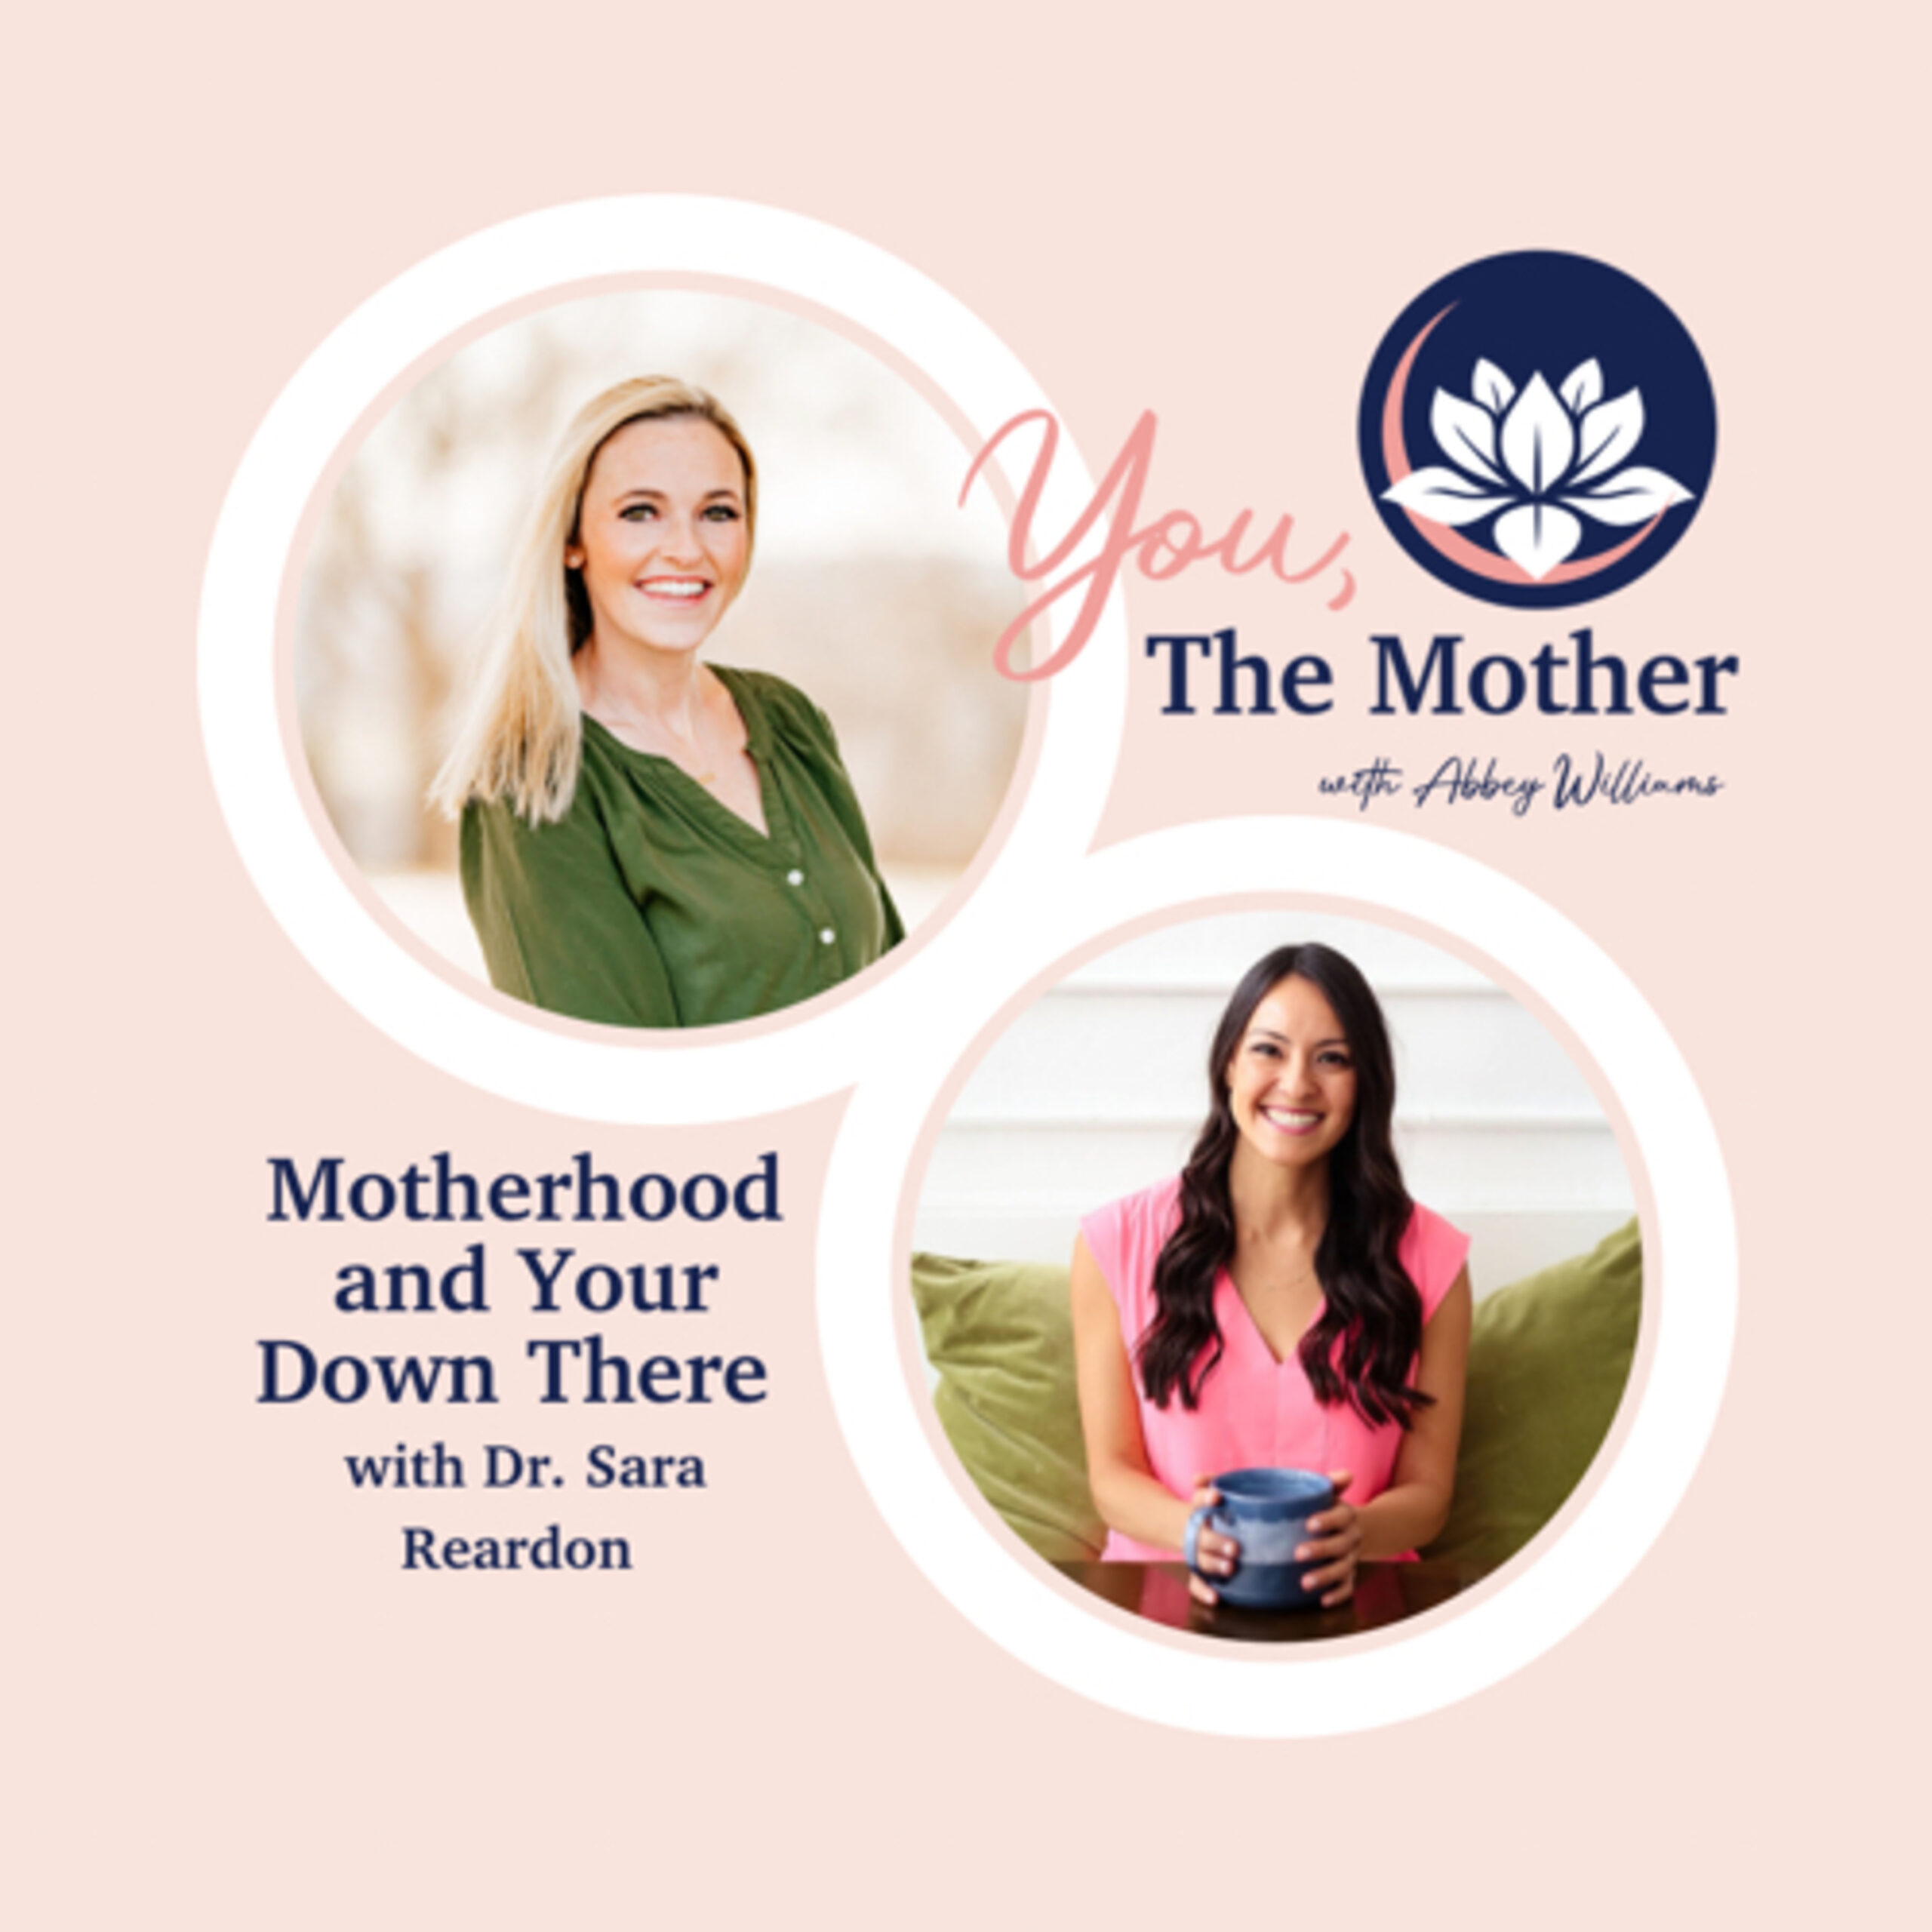 Motherhood and Your Down There with Dr. Sara Reardon